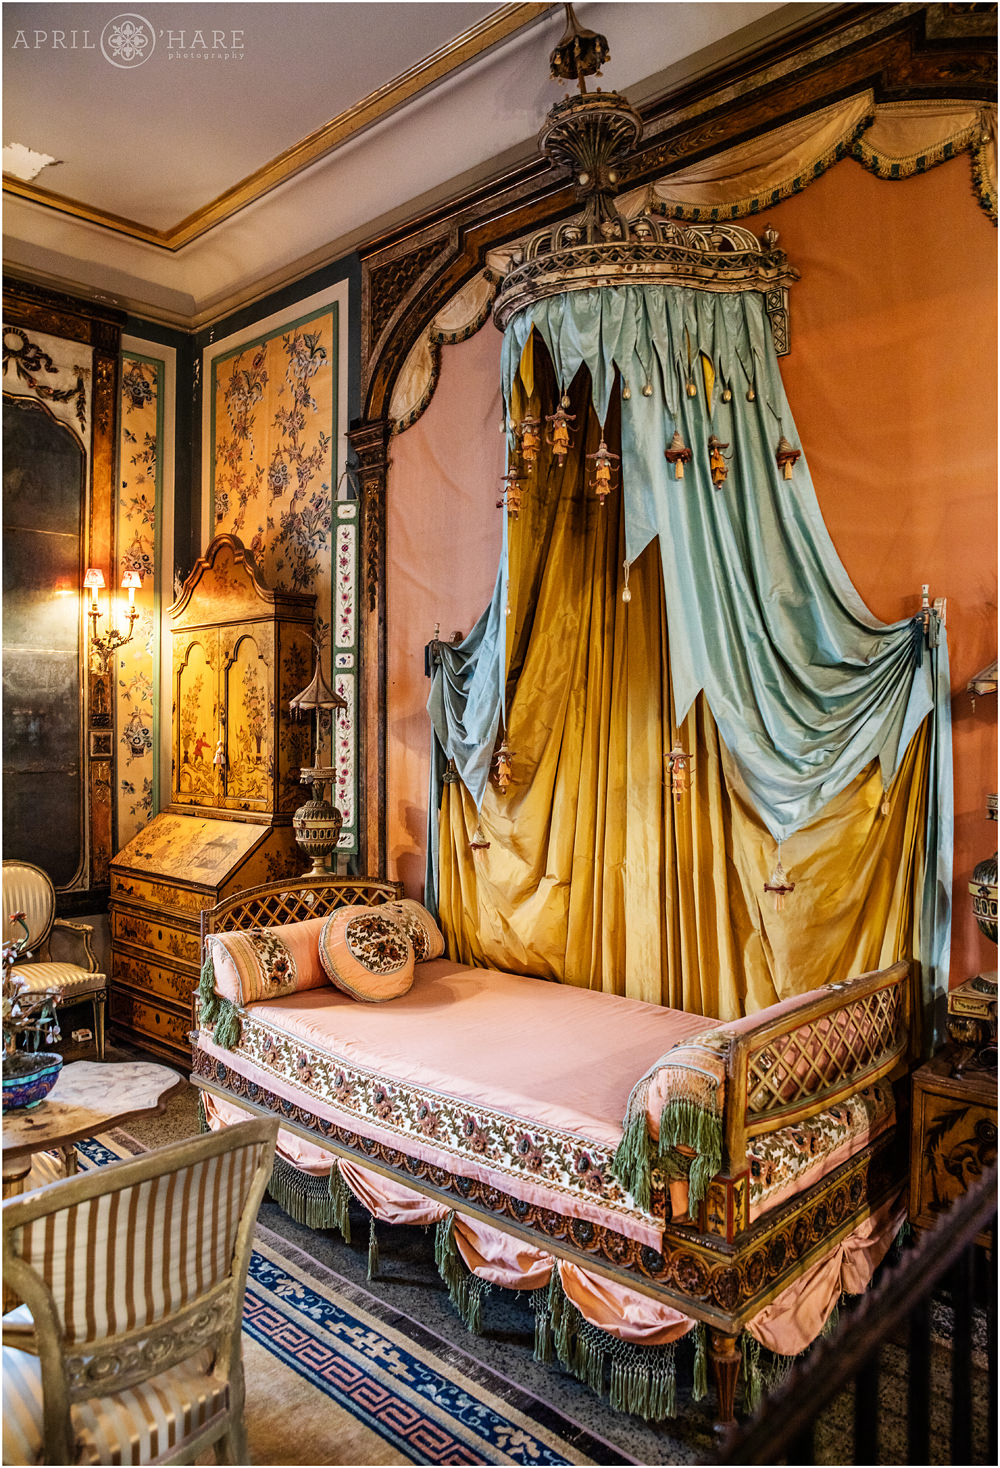 One of the many ornate interior rooms of the main house at Vizcaya Museum and Gardens